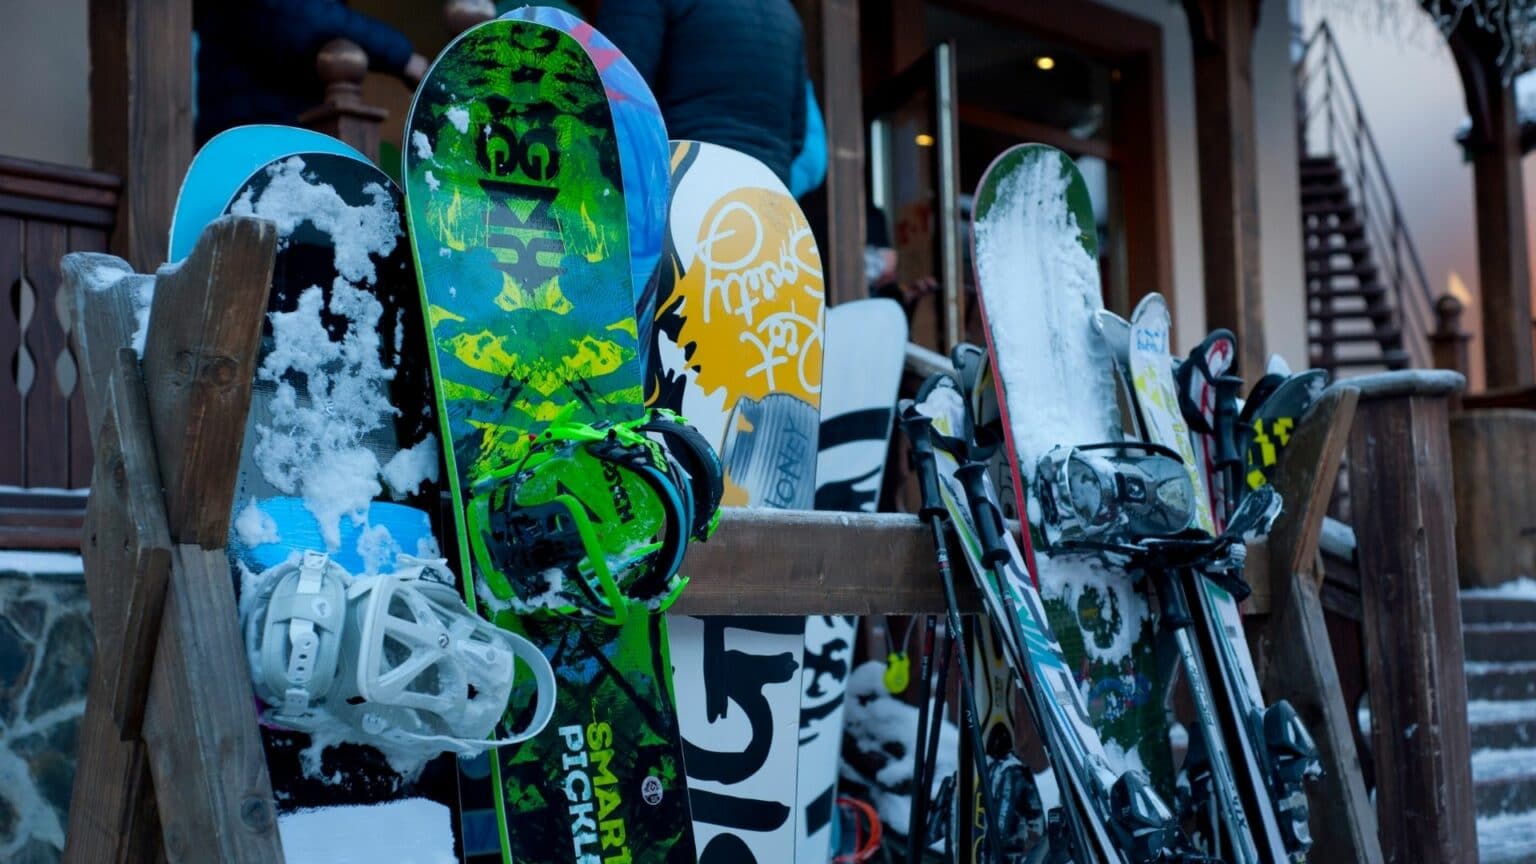 Choosing a snowboard by stance